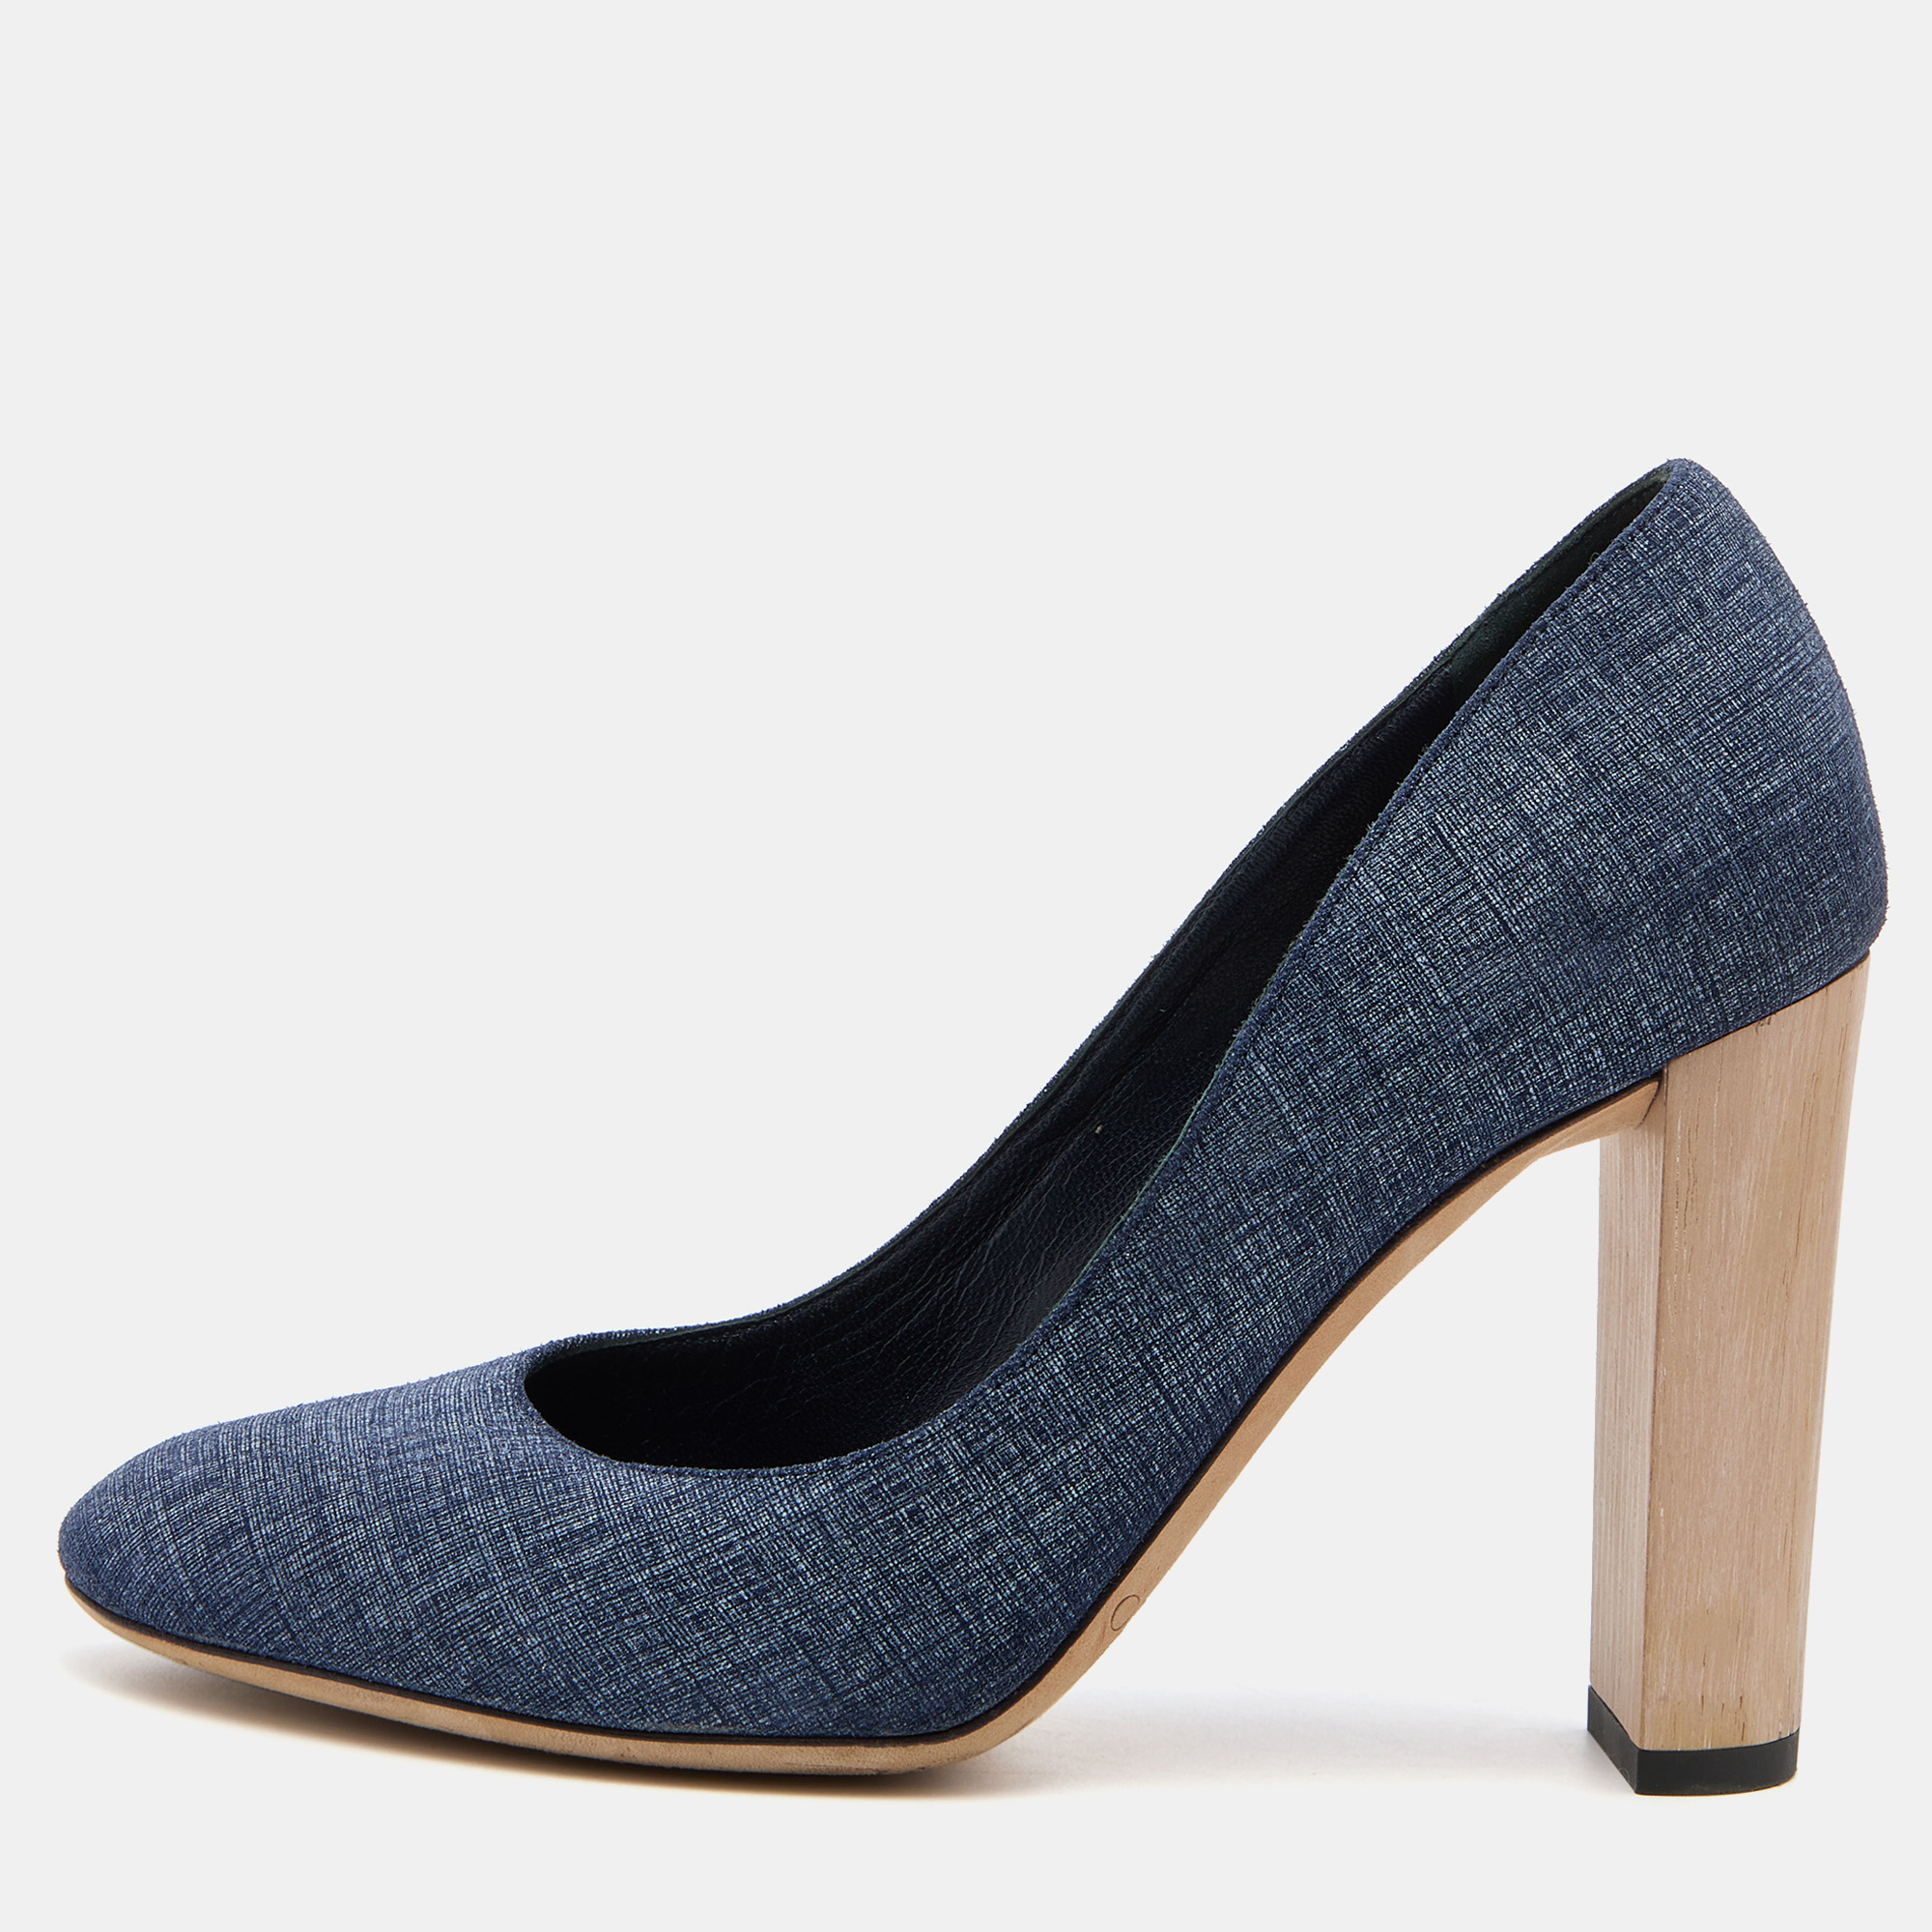 Exhibit an elegant style with this pair of pumps. These designer pumps are crafted from quality materials. They are set on durable soles and high heels.